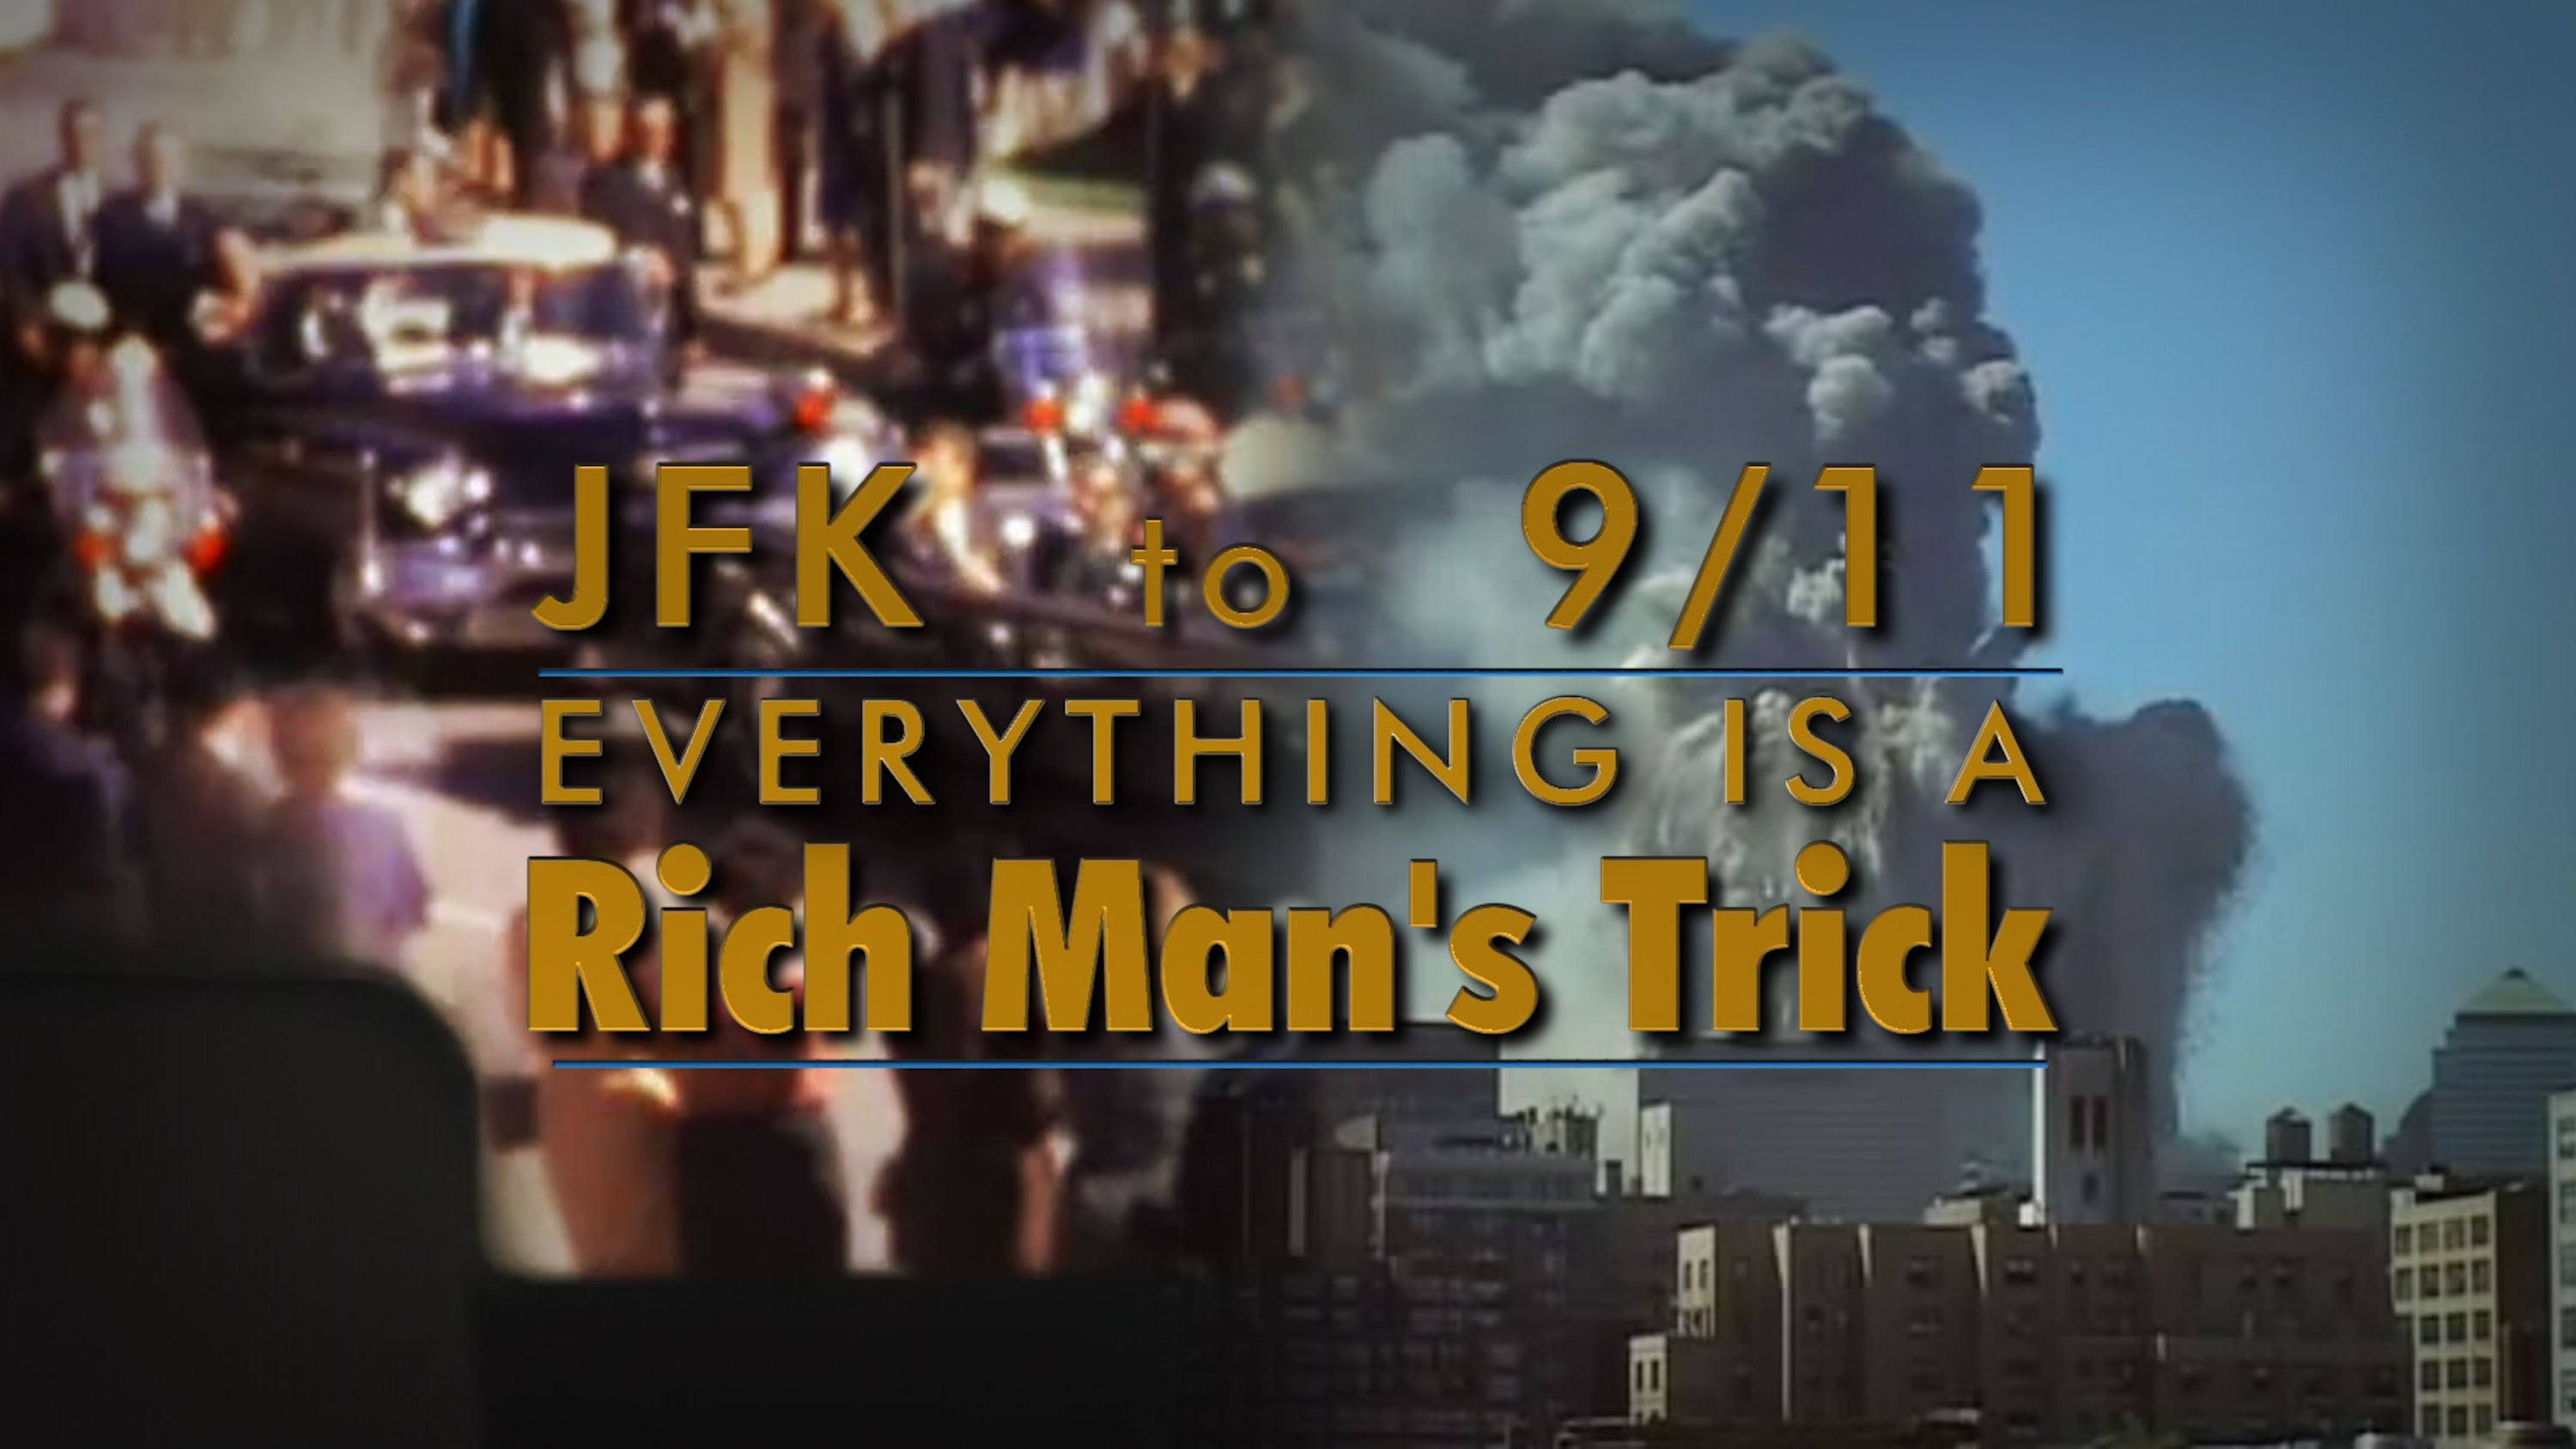 JFK to 911 Everything Is A Rich Man’s Trick